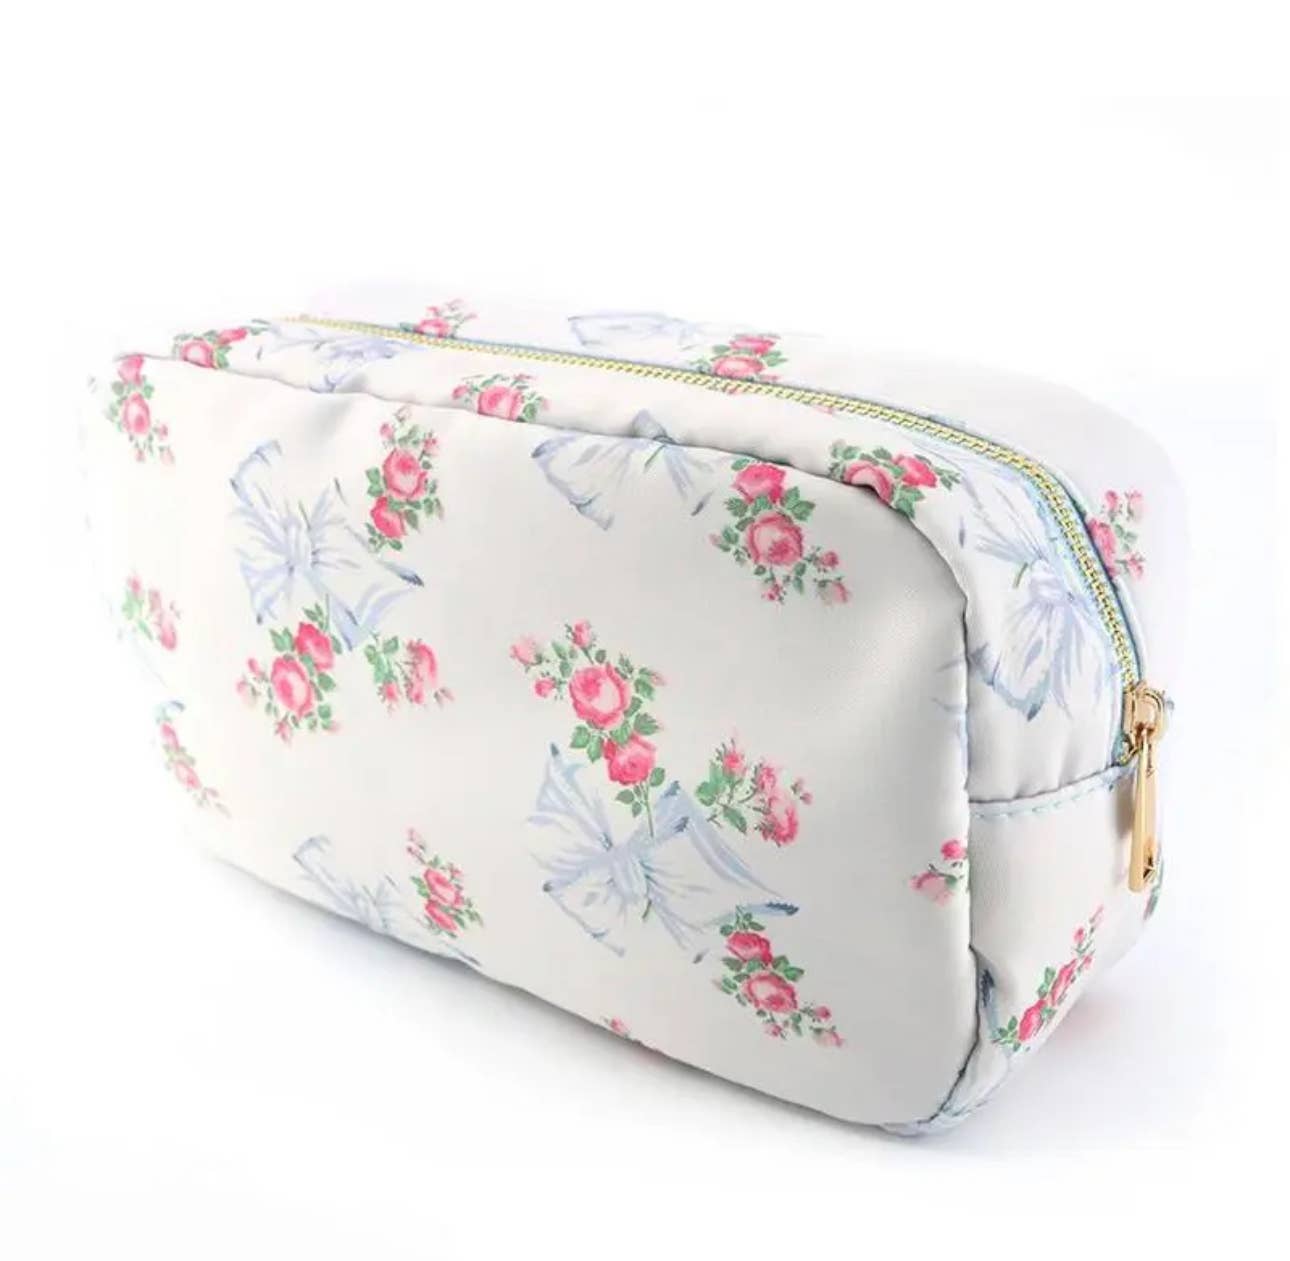 Petite Rose Cosmetic Pouch